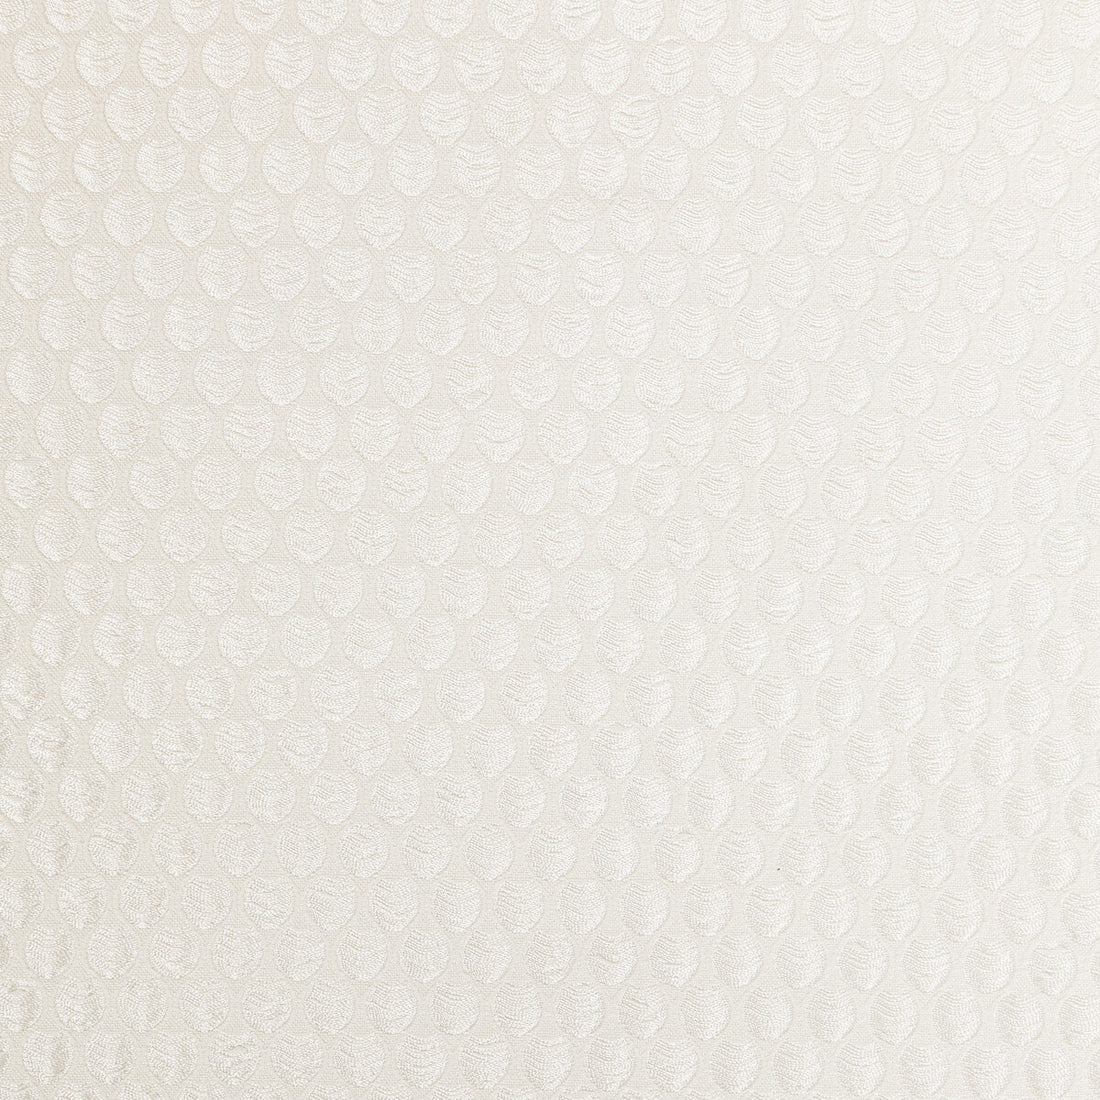 Perfect Catch fabric in pearl color - pattern 4950.1116.0 - by Kravet Couture in the Modern Luxe Silk Luster collection